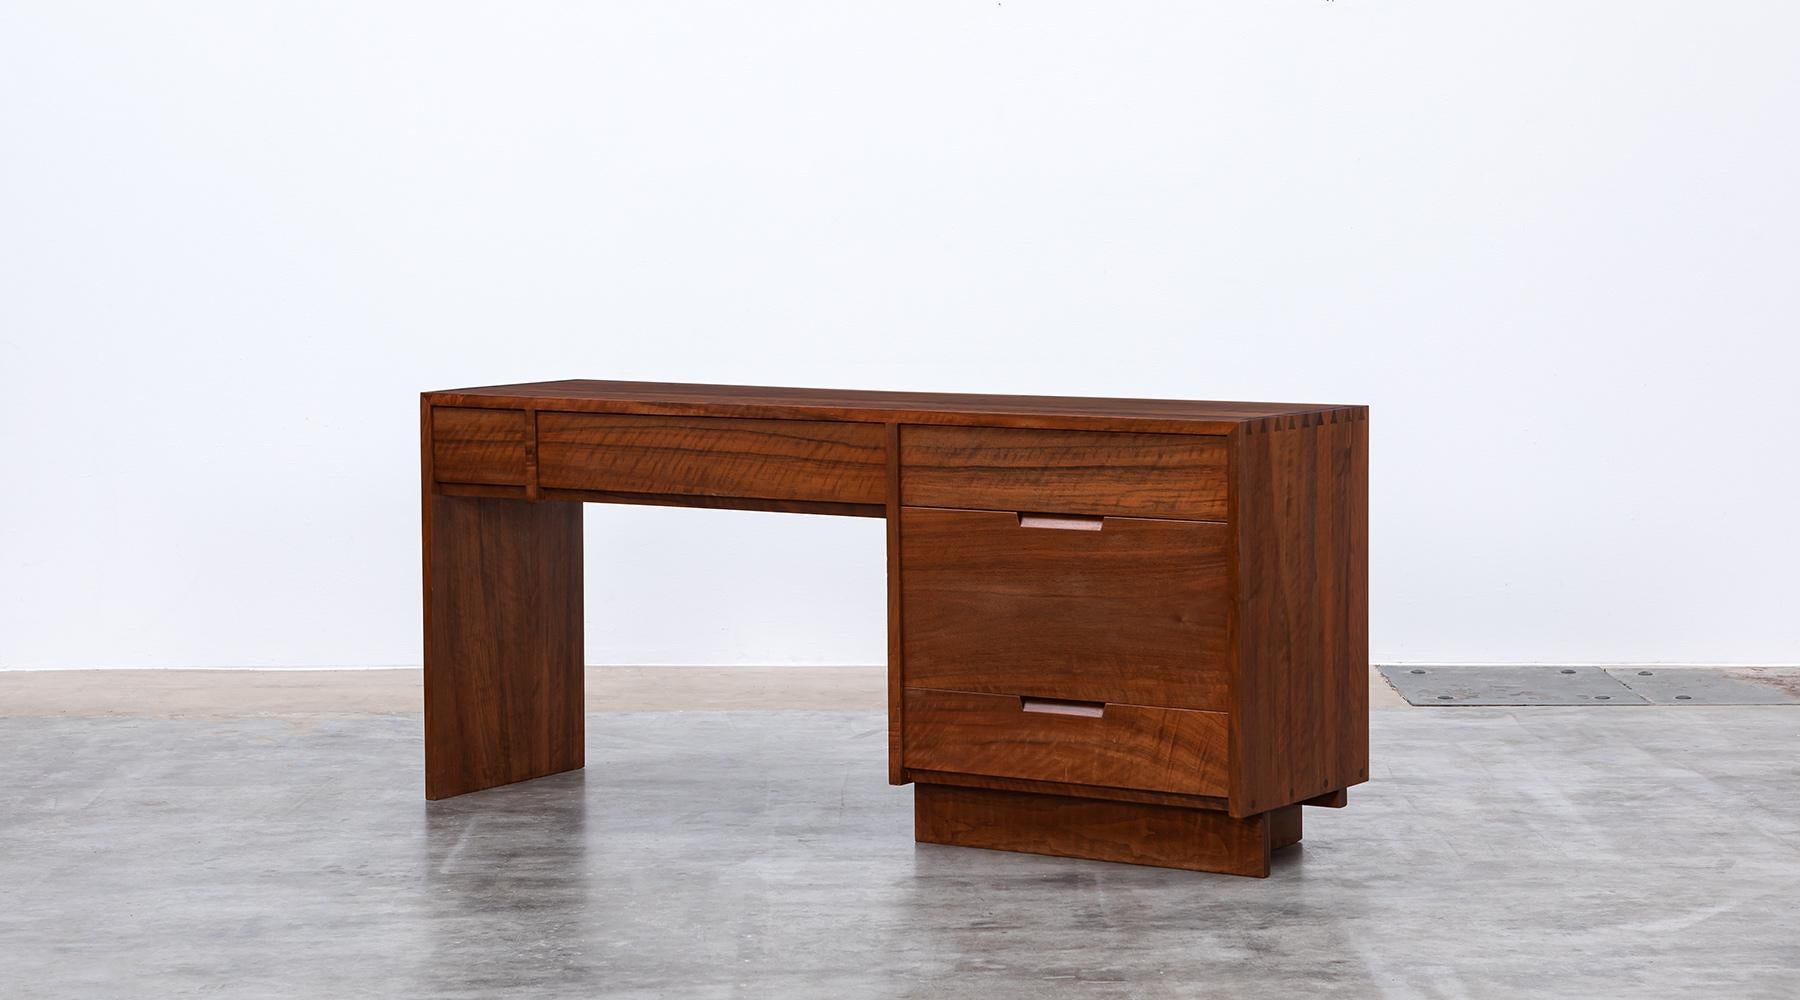 Desk by George Nakashima, American walnut, USA, 1970s.

Handcrafted, stunning, marvelous desk. This example is constructed with American walnut with handwork by George Nakashima himself. This handcrafted desk has a beautifully shape, very pure